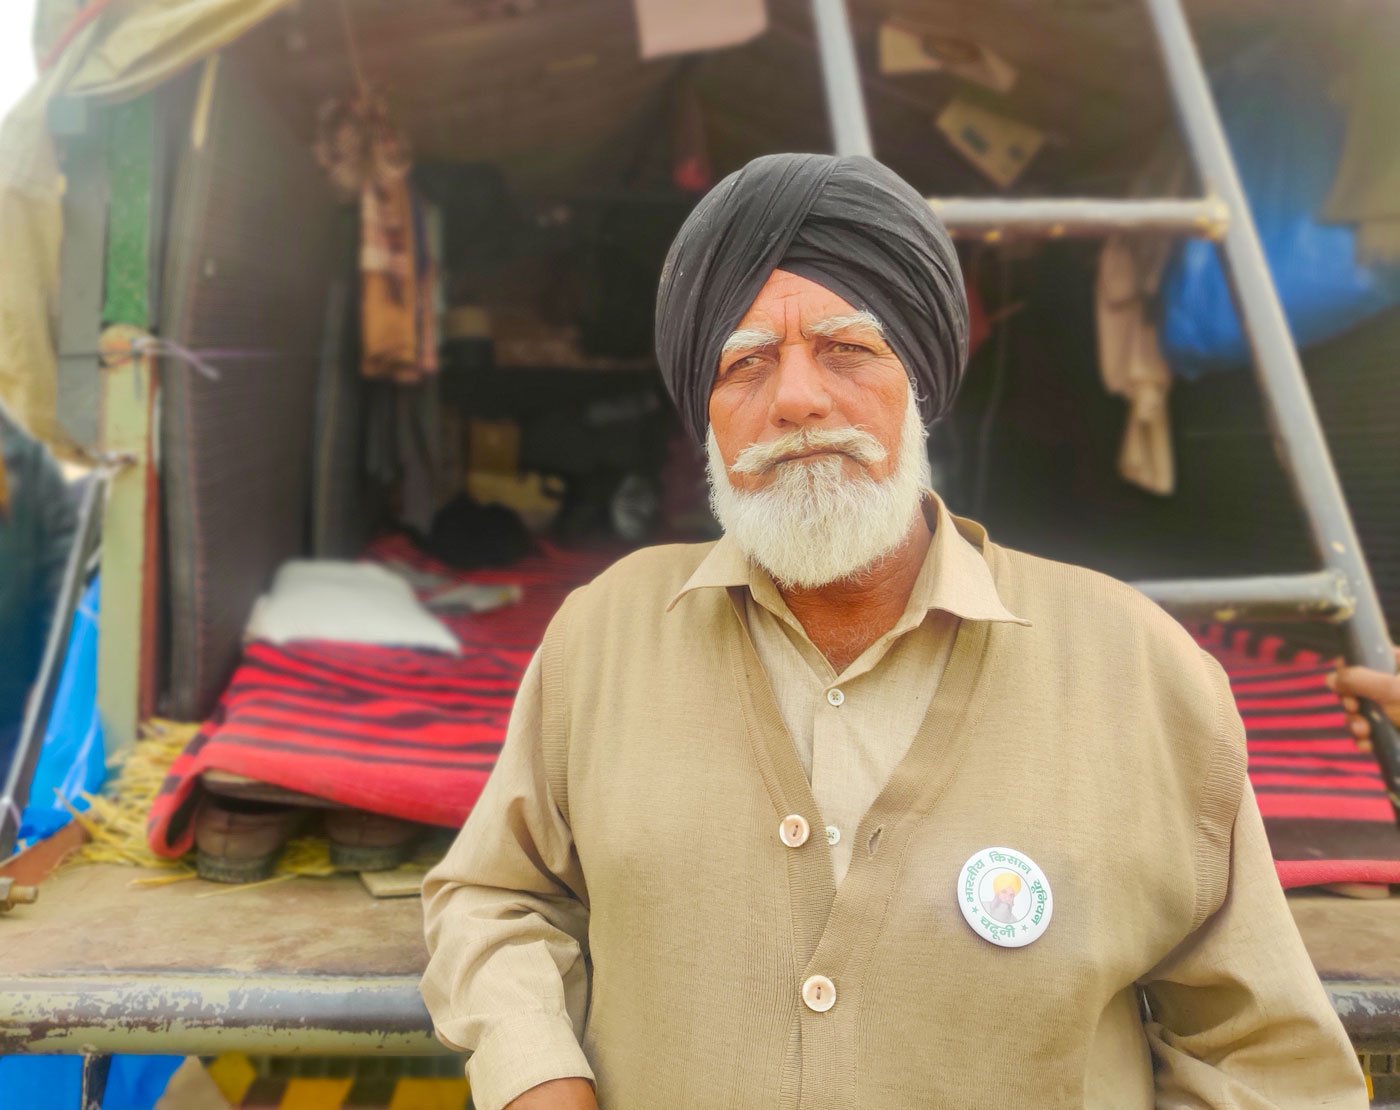 With their protest on for weeks, farmers on the Haryana-Delhi border can’t neglect their crops and land, so they have devised a relay – while some return briefly to their villages, others take their place at Singhu

